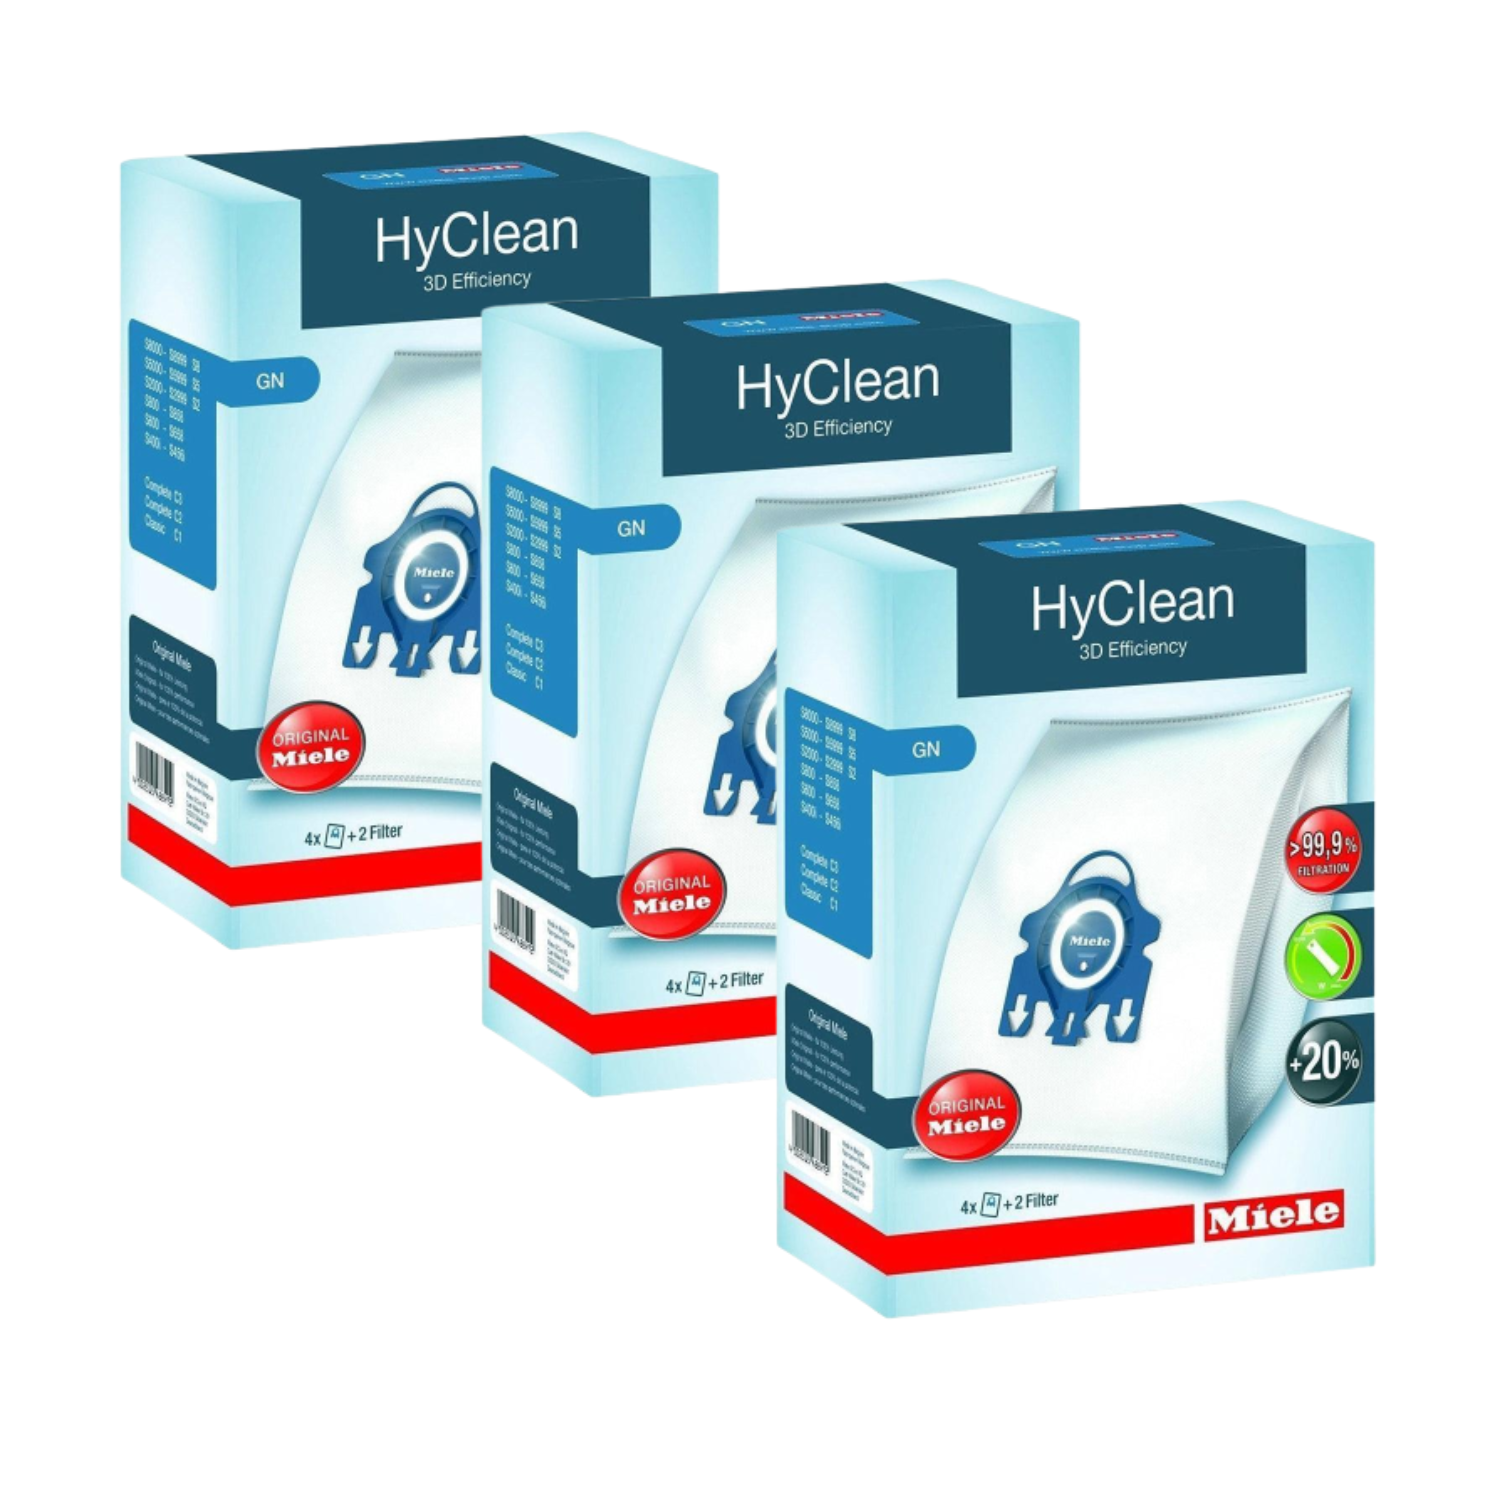 3 x Miele HyClean 3D Vacuum Cleaner Bags | GNHMIELEBGS from Miele - DID Electrical